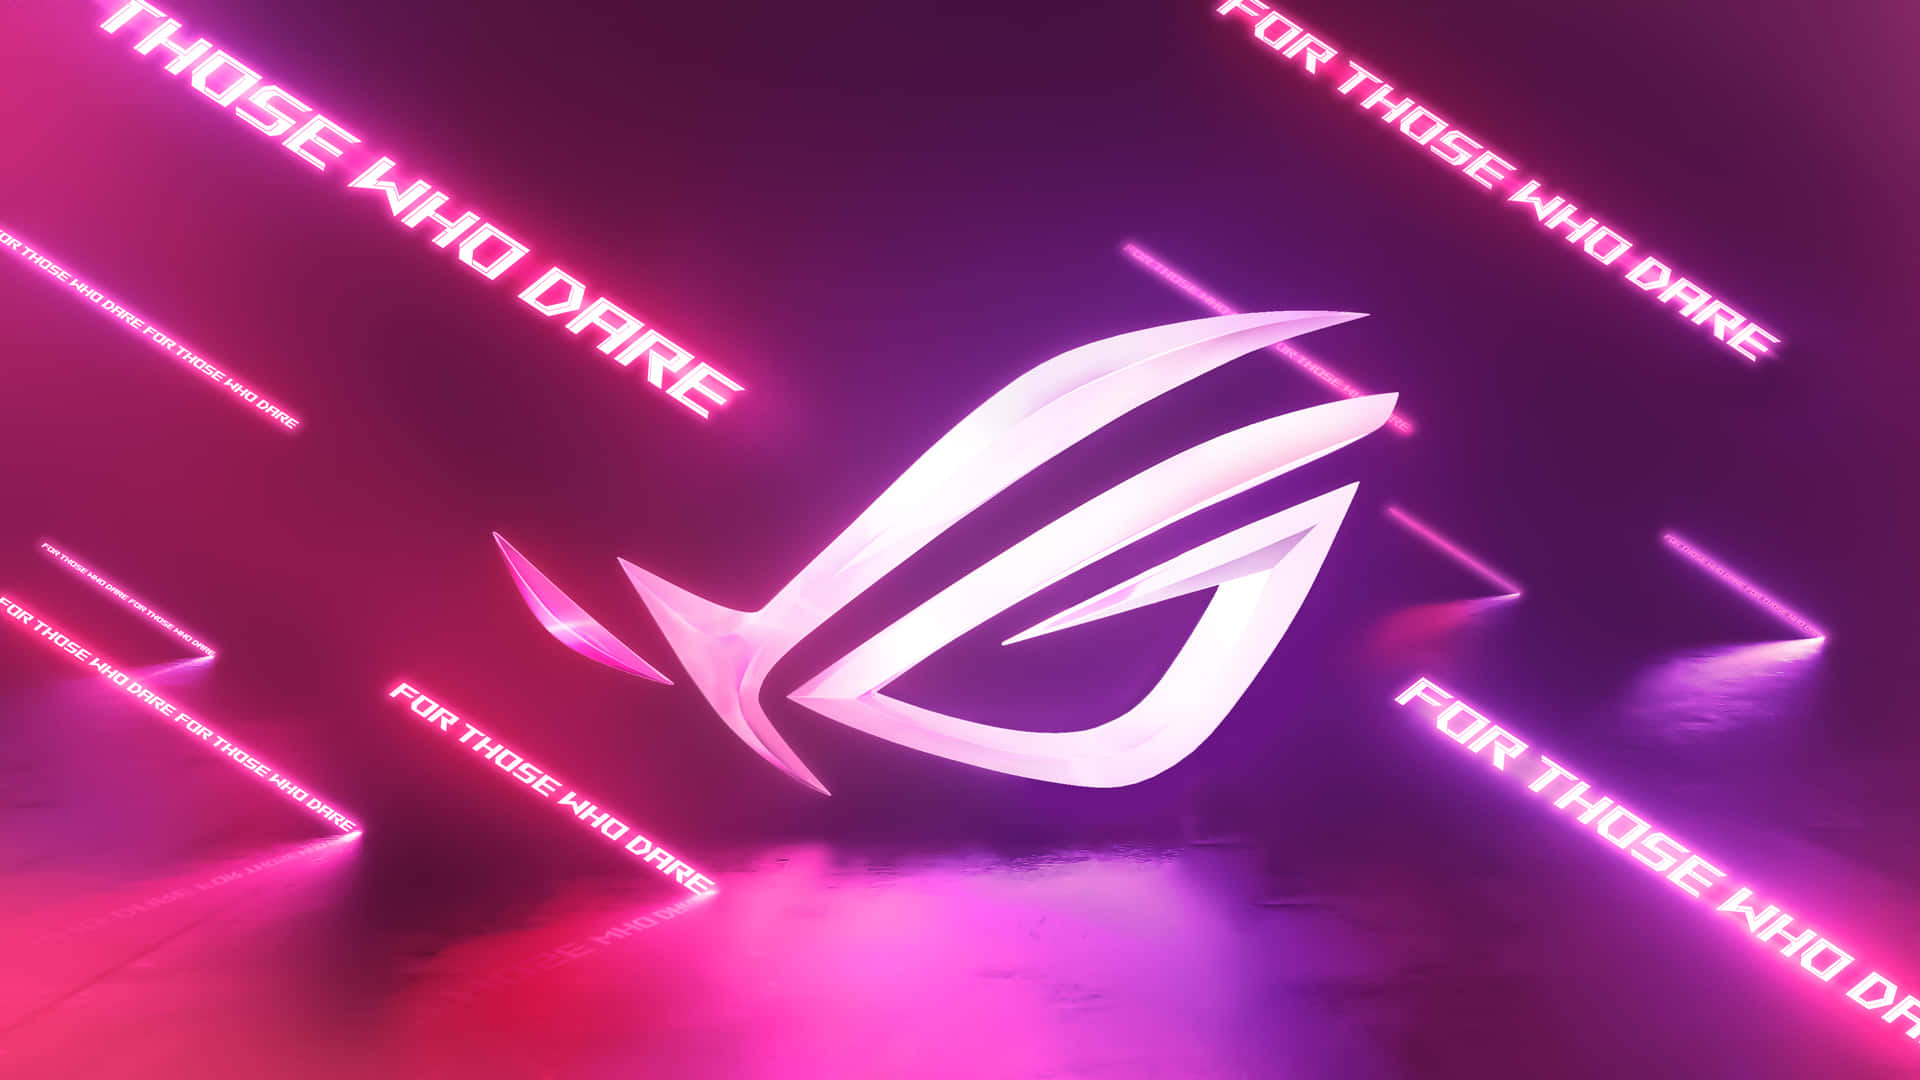 Experience the power and performance of ROG